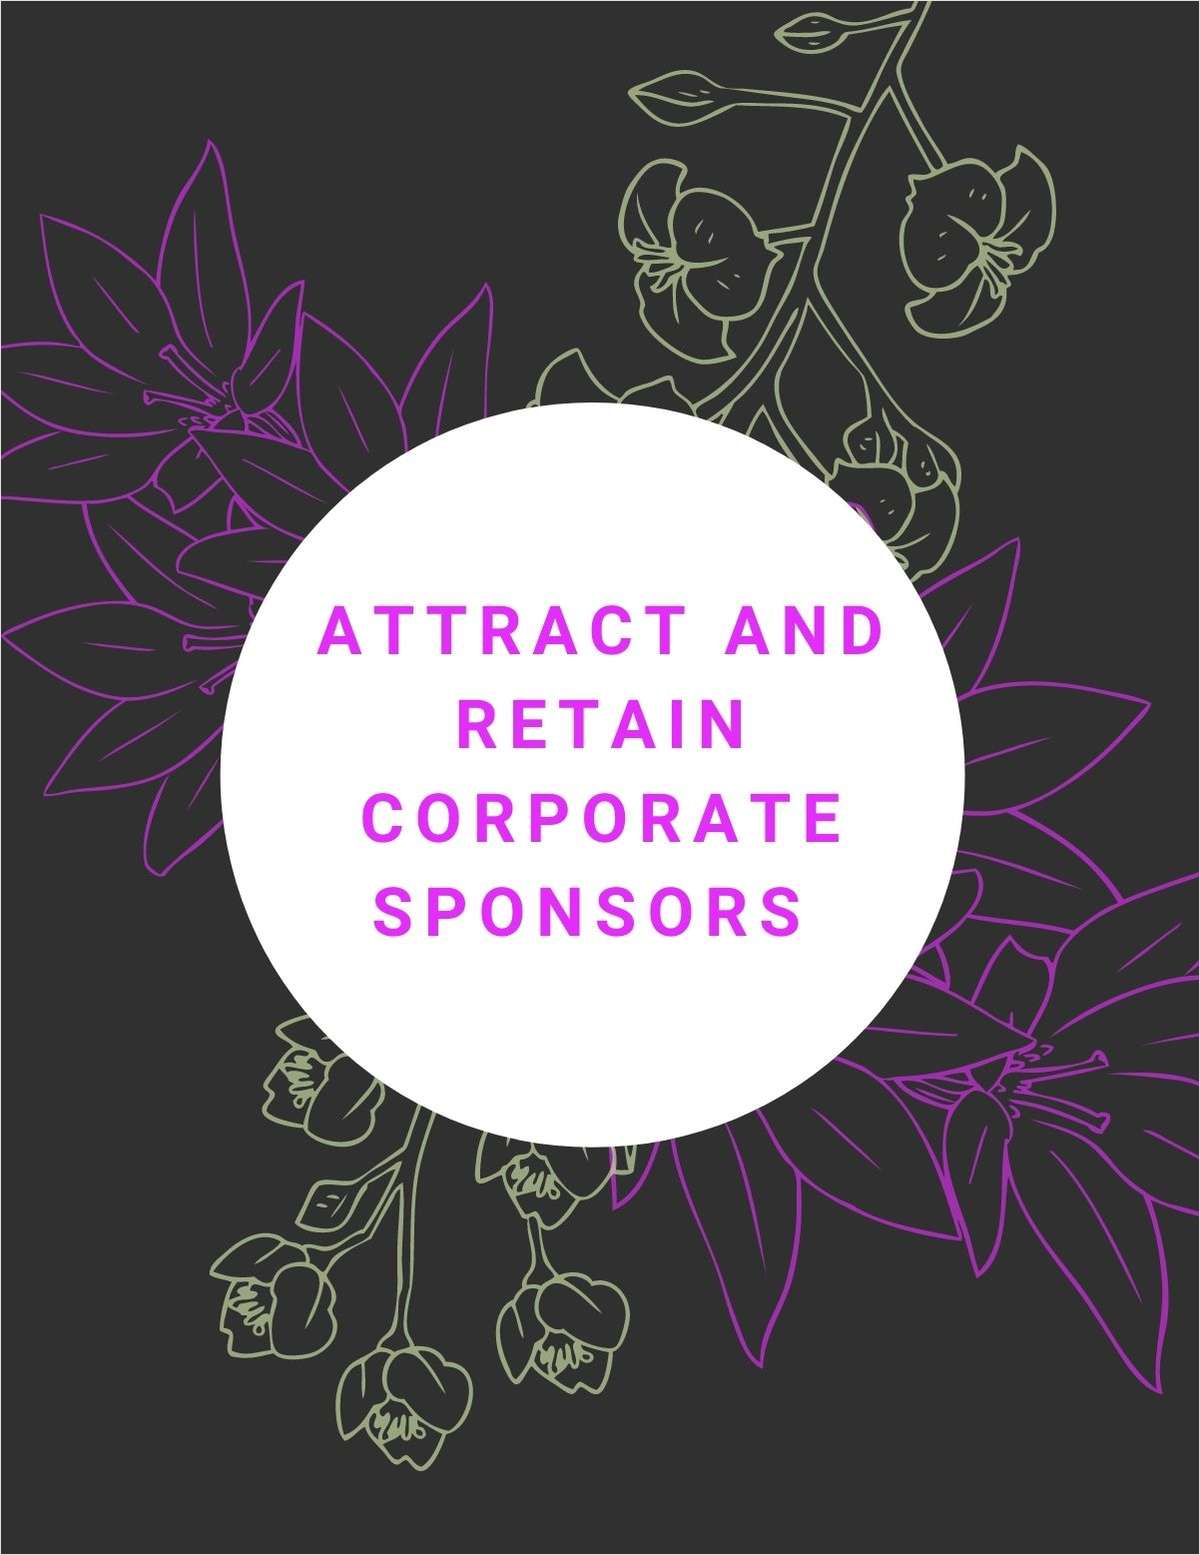 Attract and Retain Corporate Sponsors with this Template